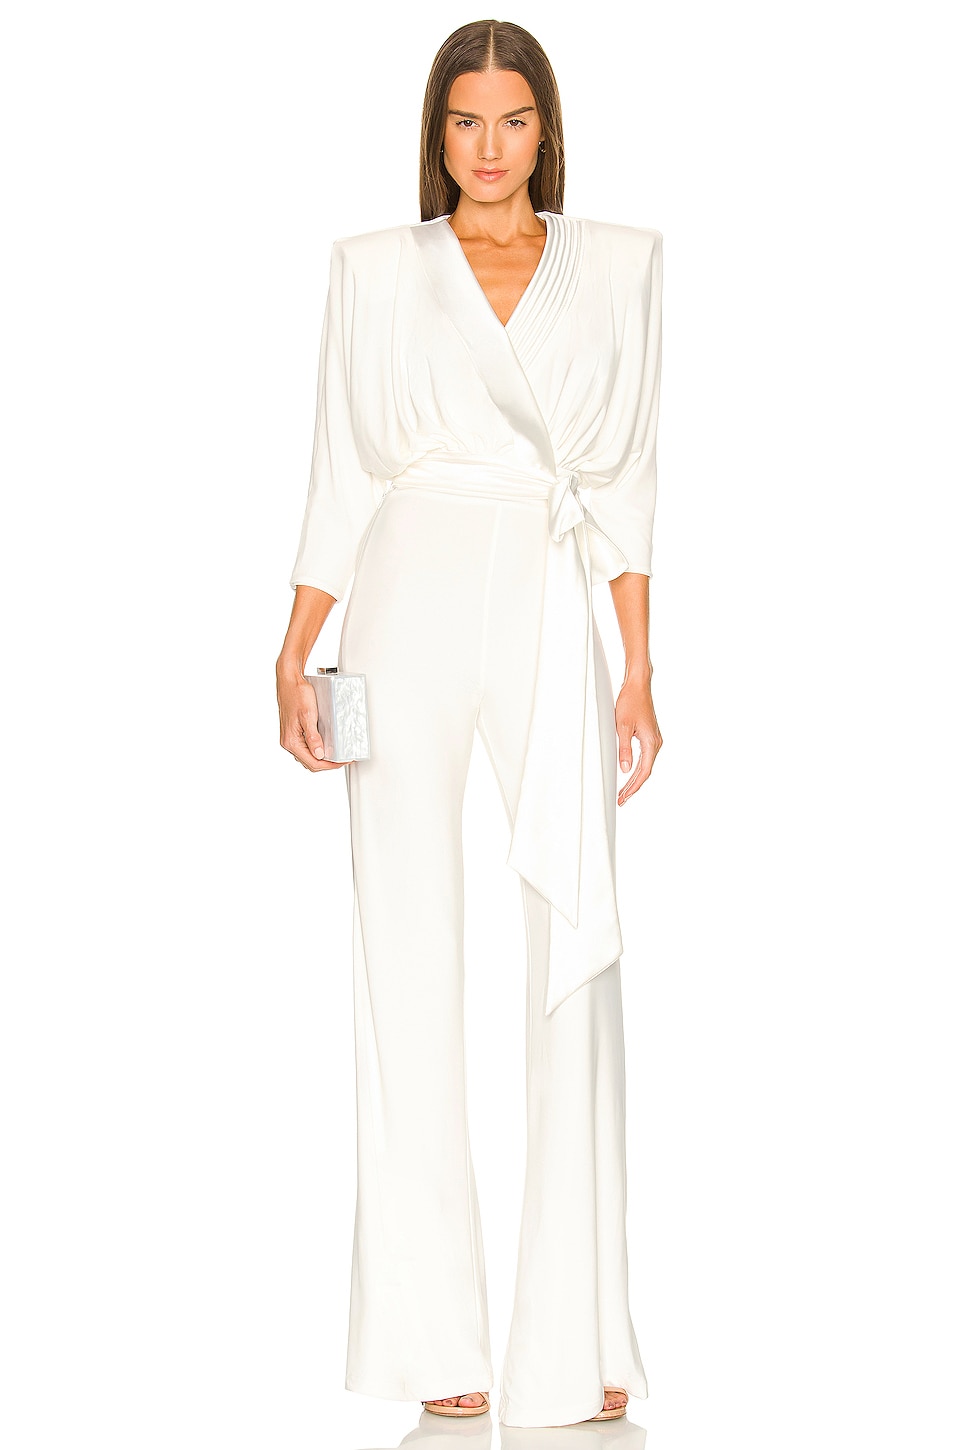 White Jumpsuit for Bride Rehearsal Dinner with Padded Shoulders and Tie Waist